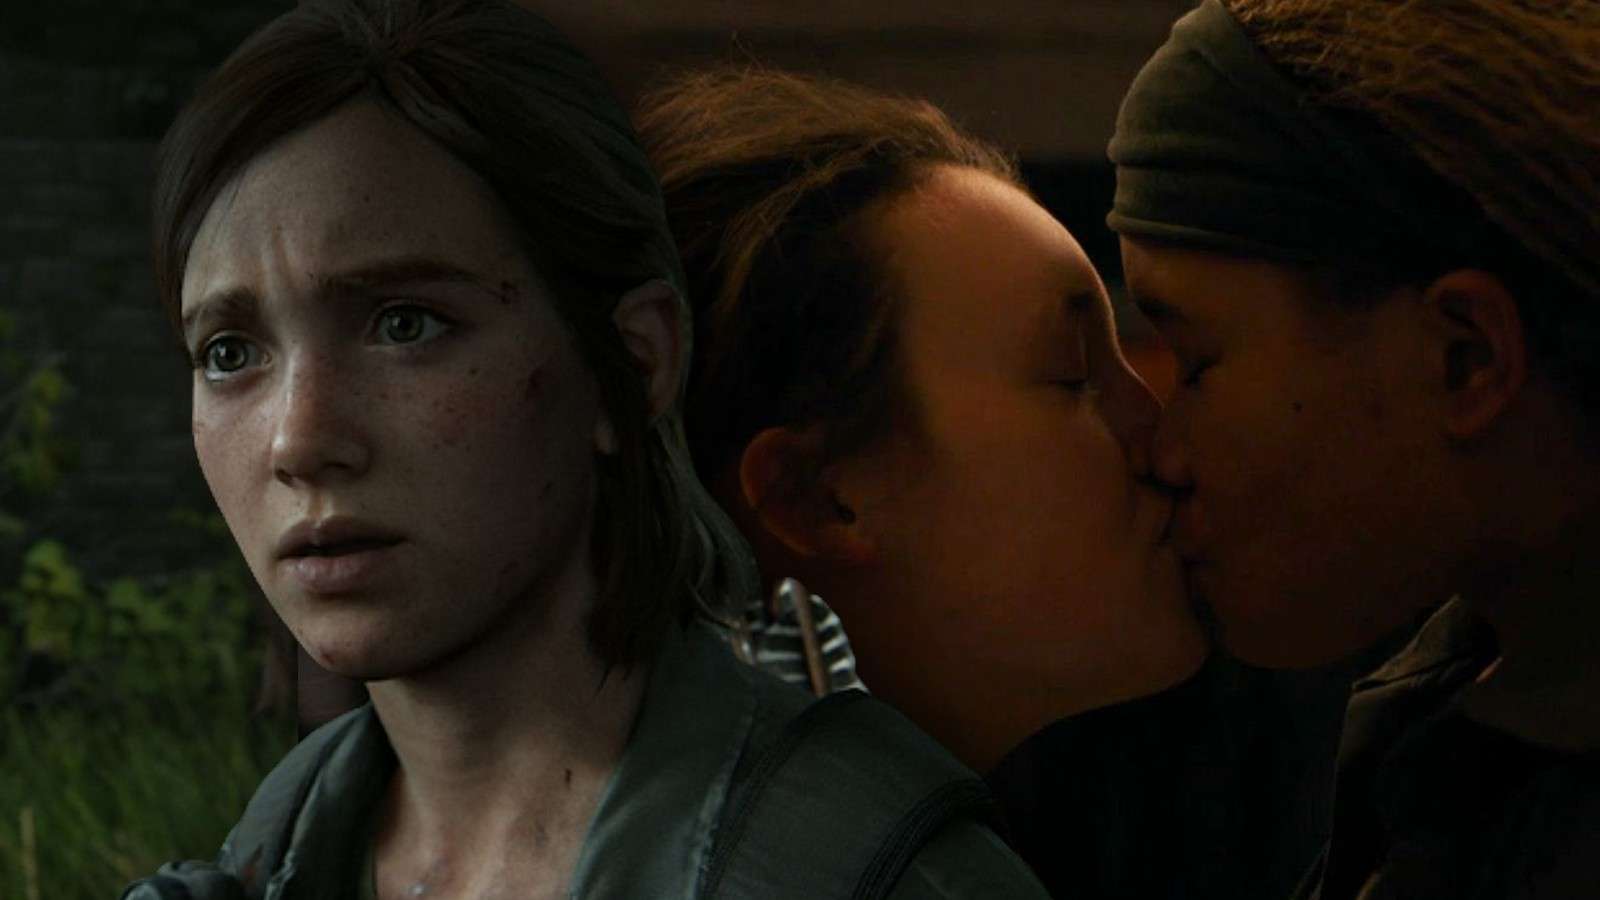 Ellie in The Last of Us Part 2 and Ellie and Riley in Episode 7